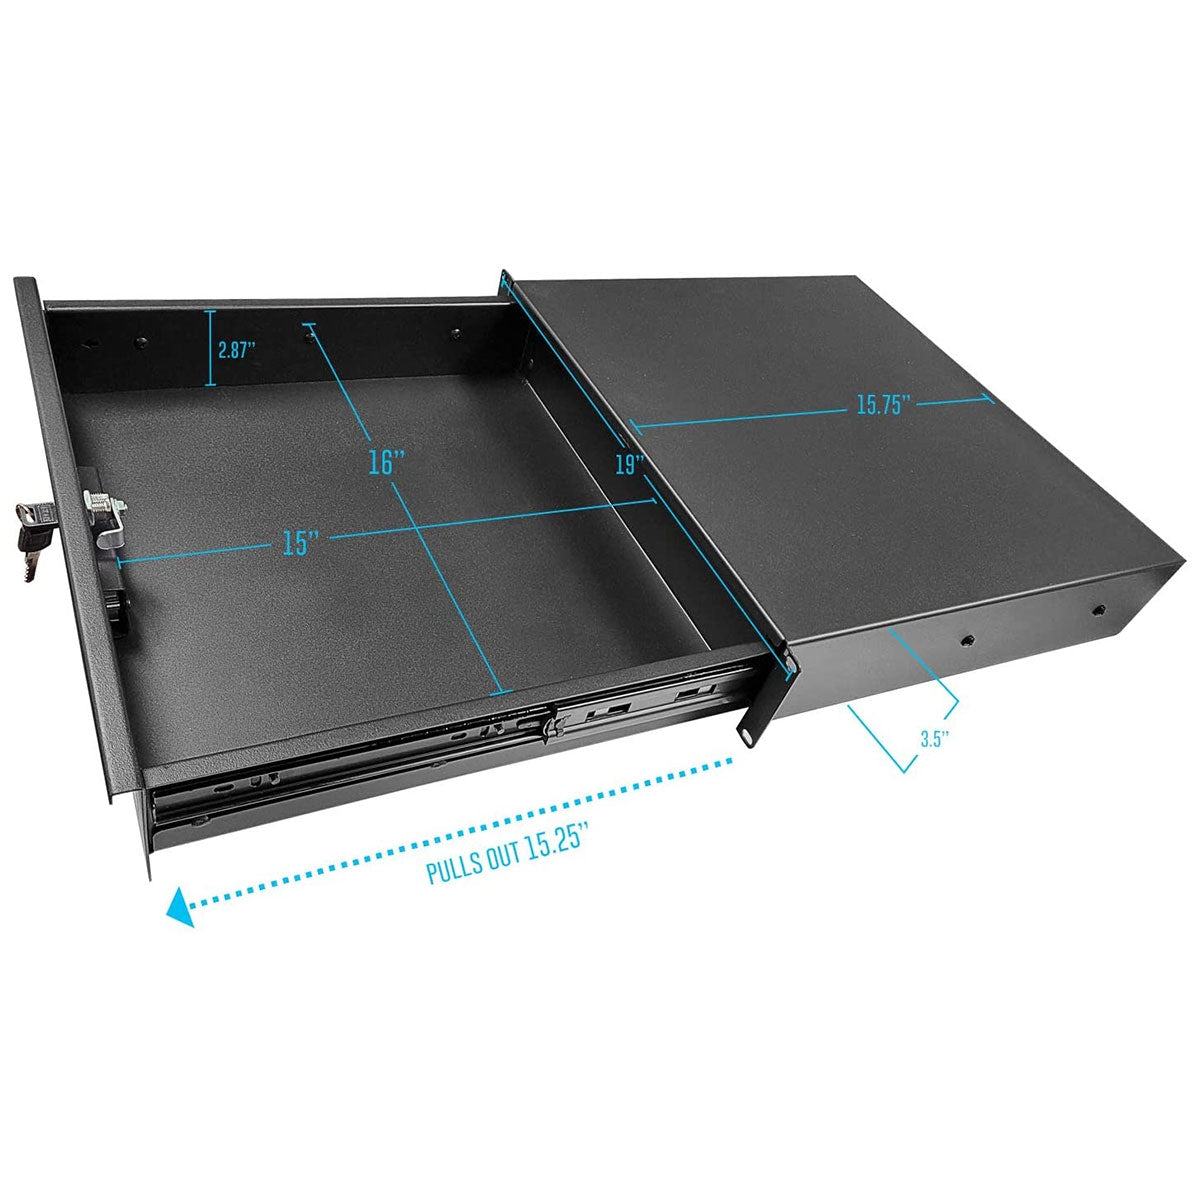 AxcessAbles 2U Locking Rack Drawer | 15 inch Deep Secured Metal Server Rack Mount Storage Drawer | 45lb Capacity | Compatible with 19-Inch Networking Racks, Audio Video Equipment Cabinets (RKDRAWER2U)